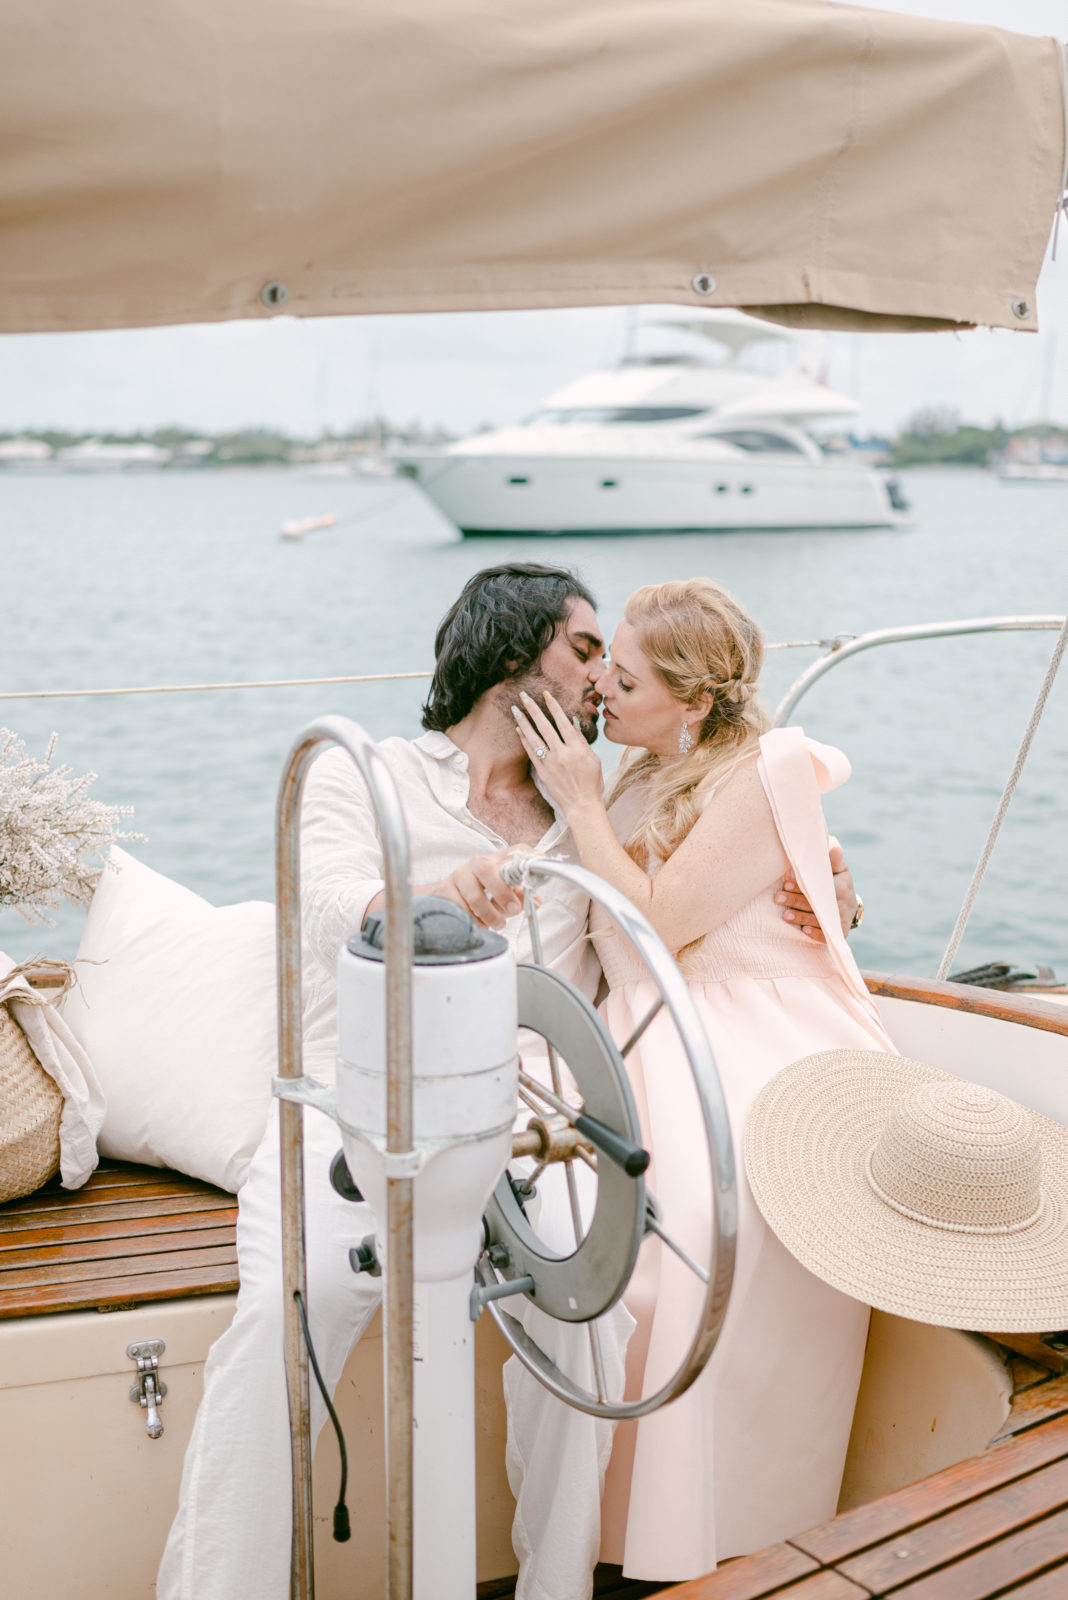 Couple kissing while driving a boat